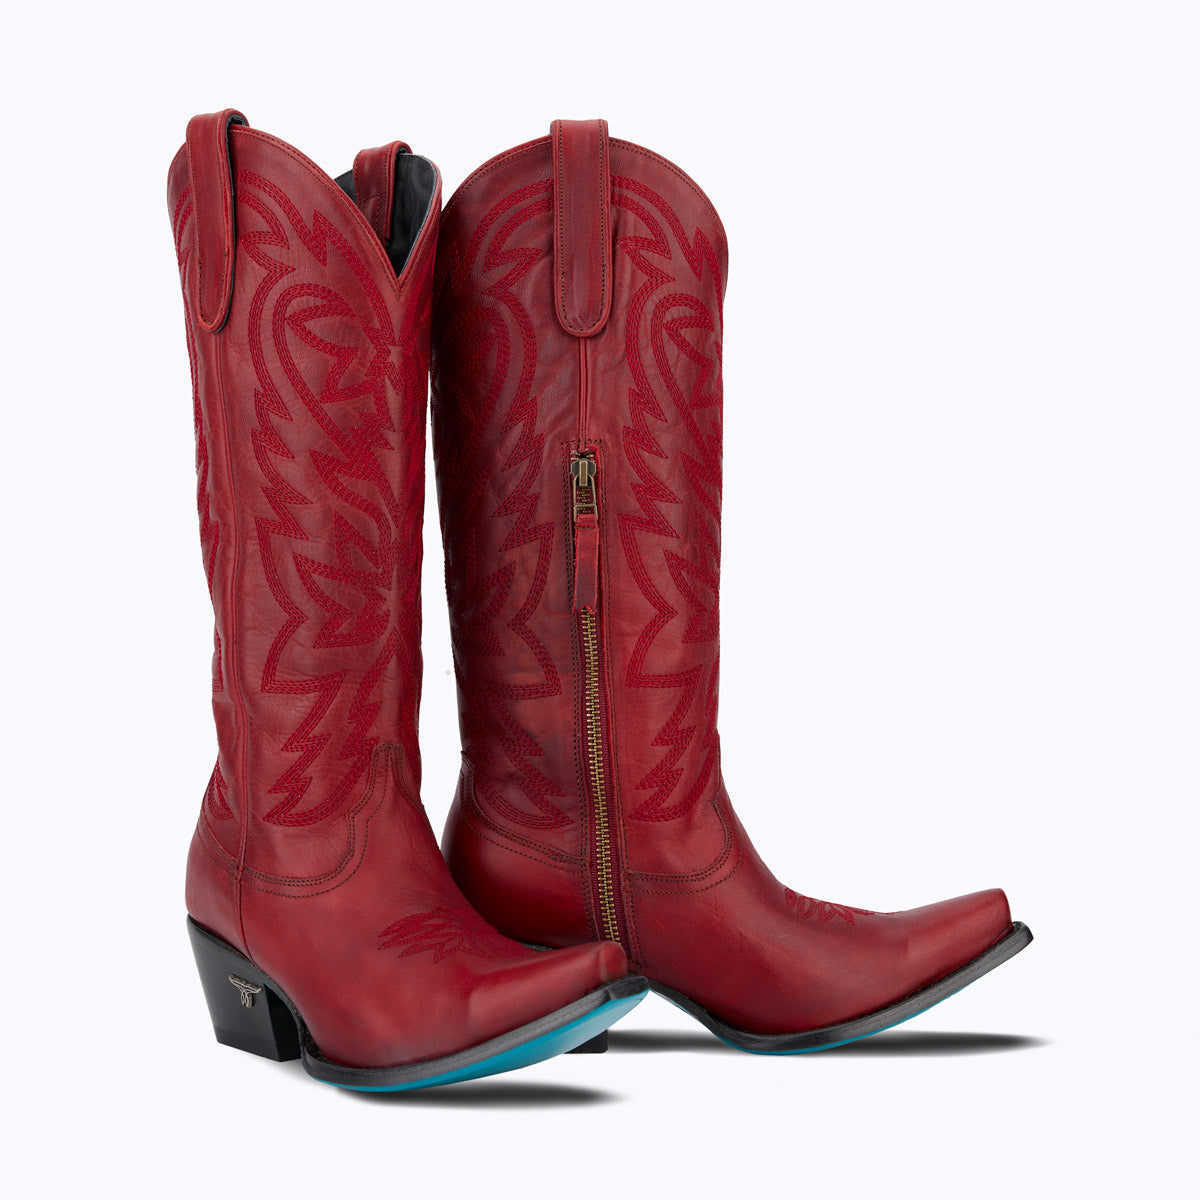 Lane SMOKESHOW BOOTS in Smoldering Ruby Red